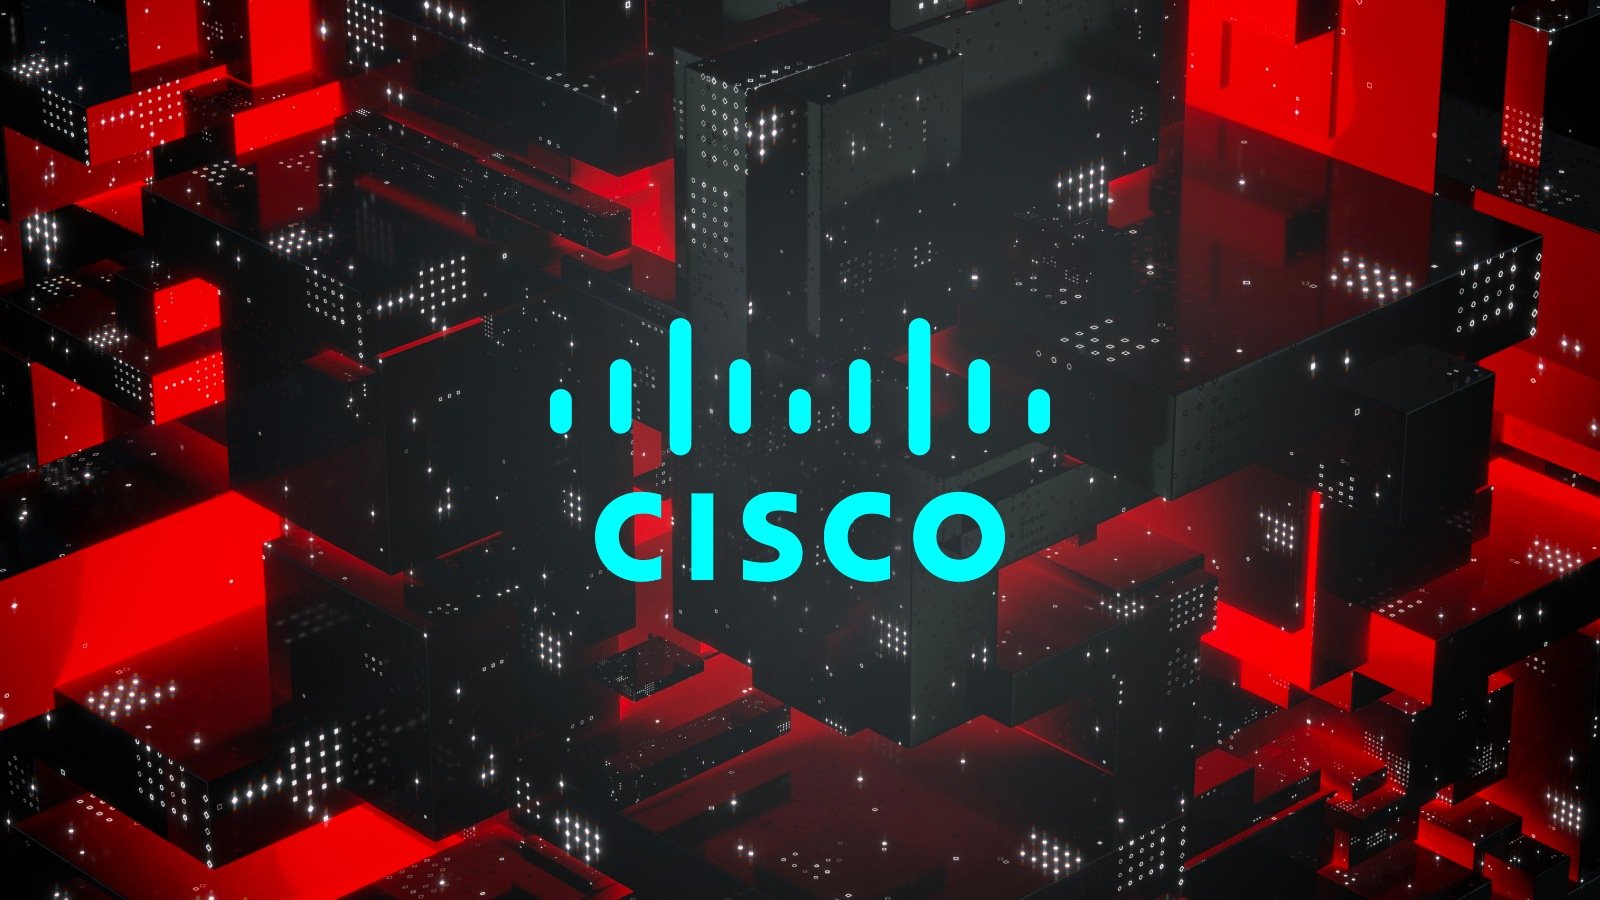 Cisco Catalyst SD-WAN Manager flaw allows remote server access – Source: www.bleepingcomputer.com